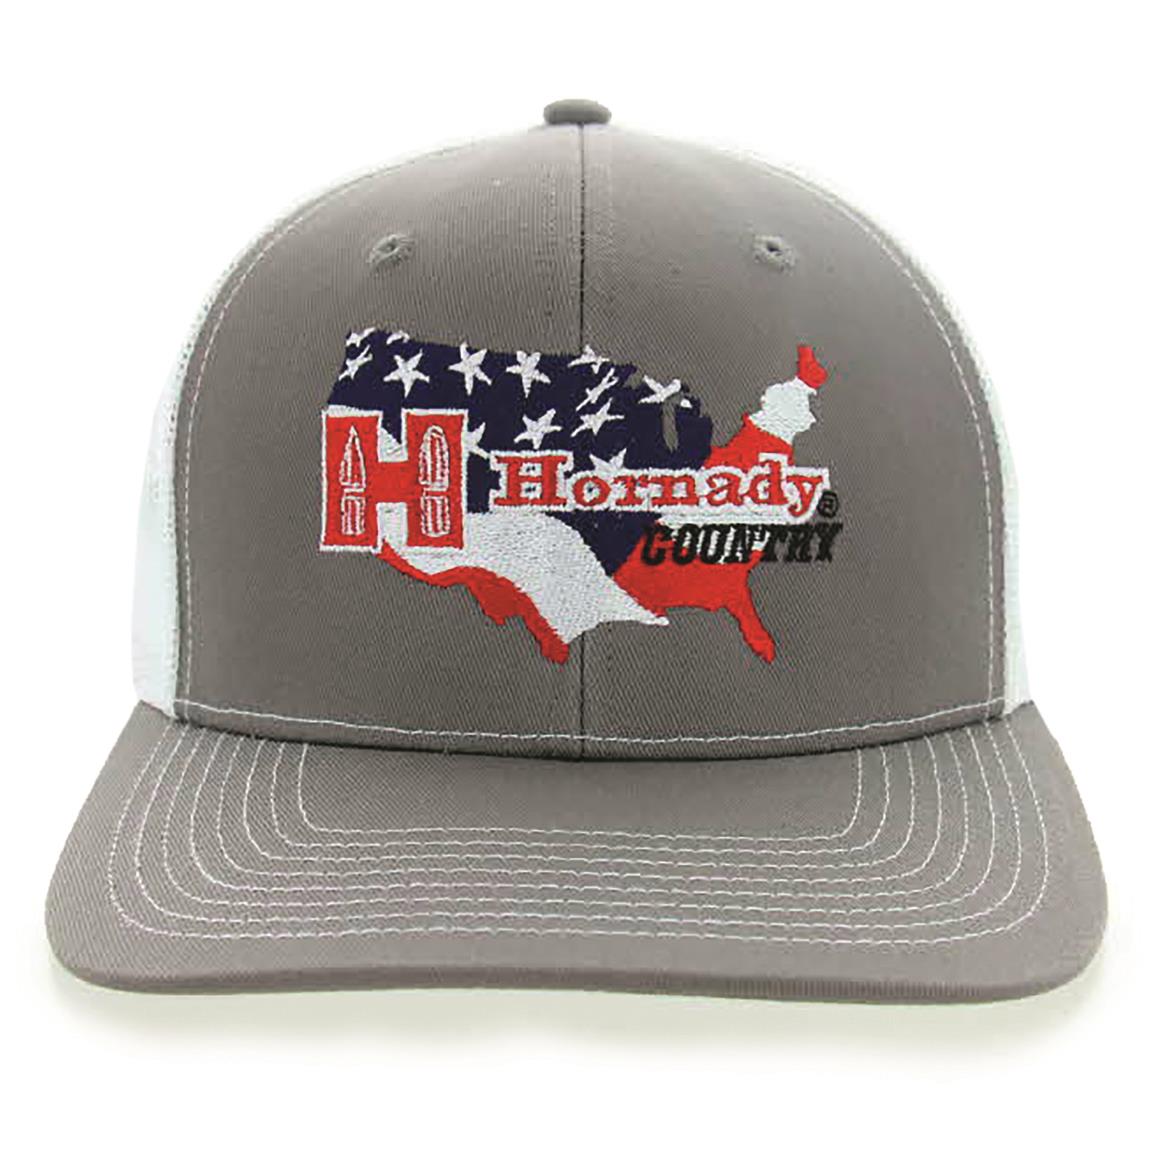 Hornady Men's Country Logo Trucker Cap, Embroidered Logo, Charcoal Grey/white